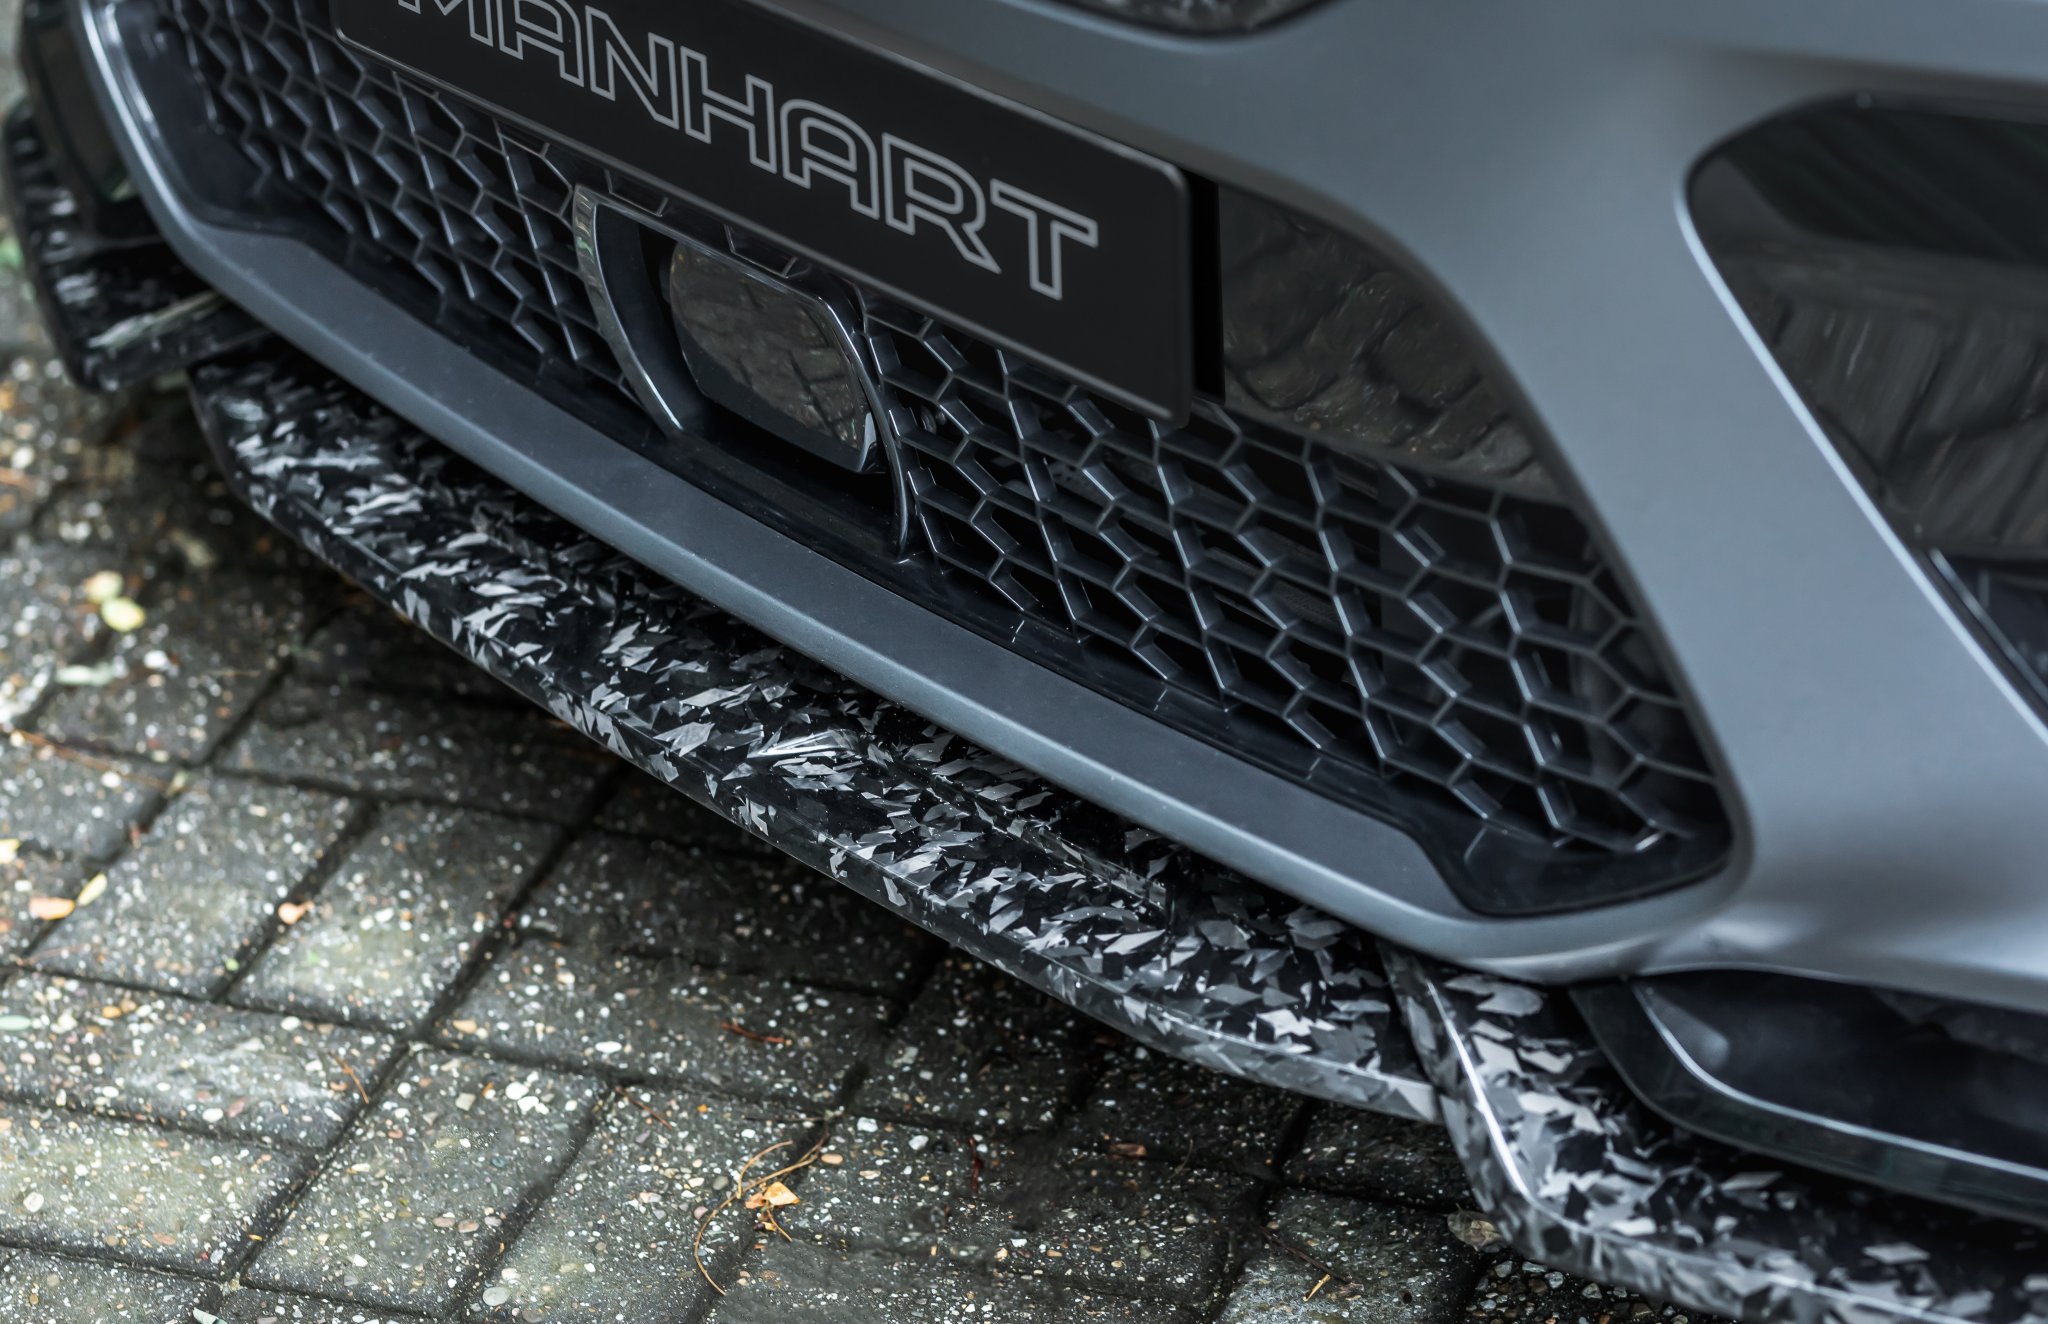 Check our price and buy an Manhart carbon fiber body kit for BMW X6 M F96 WB!